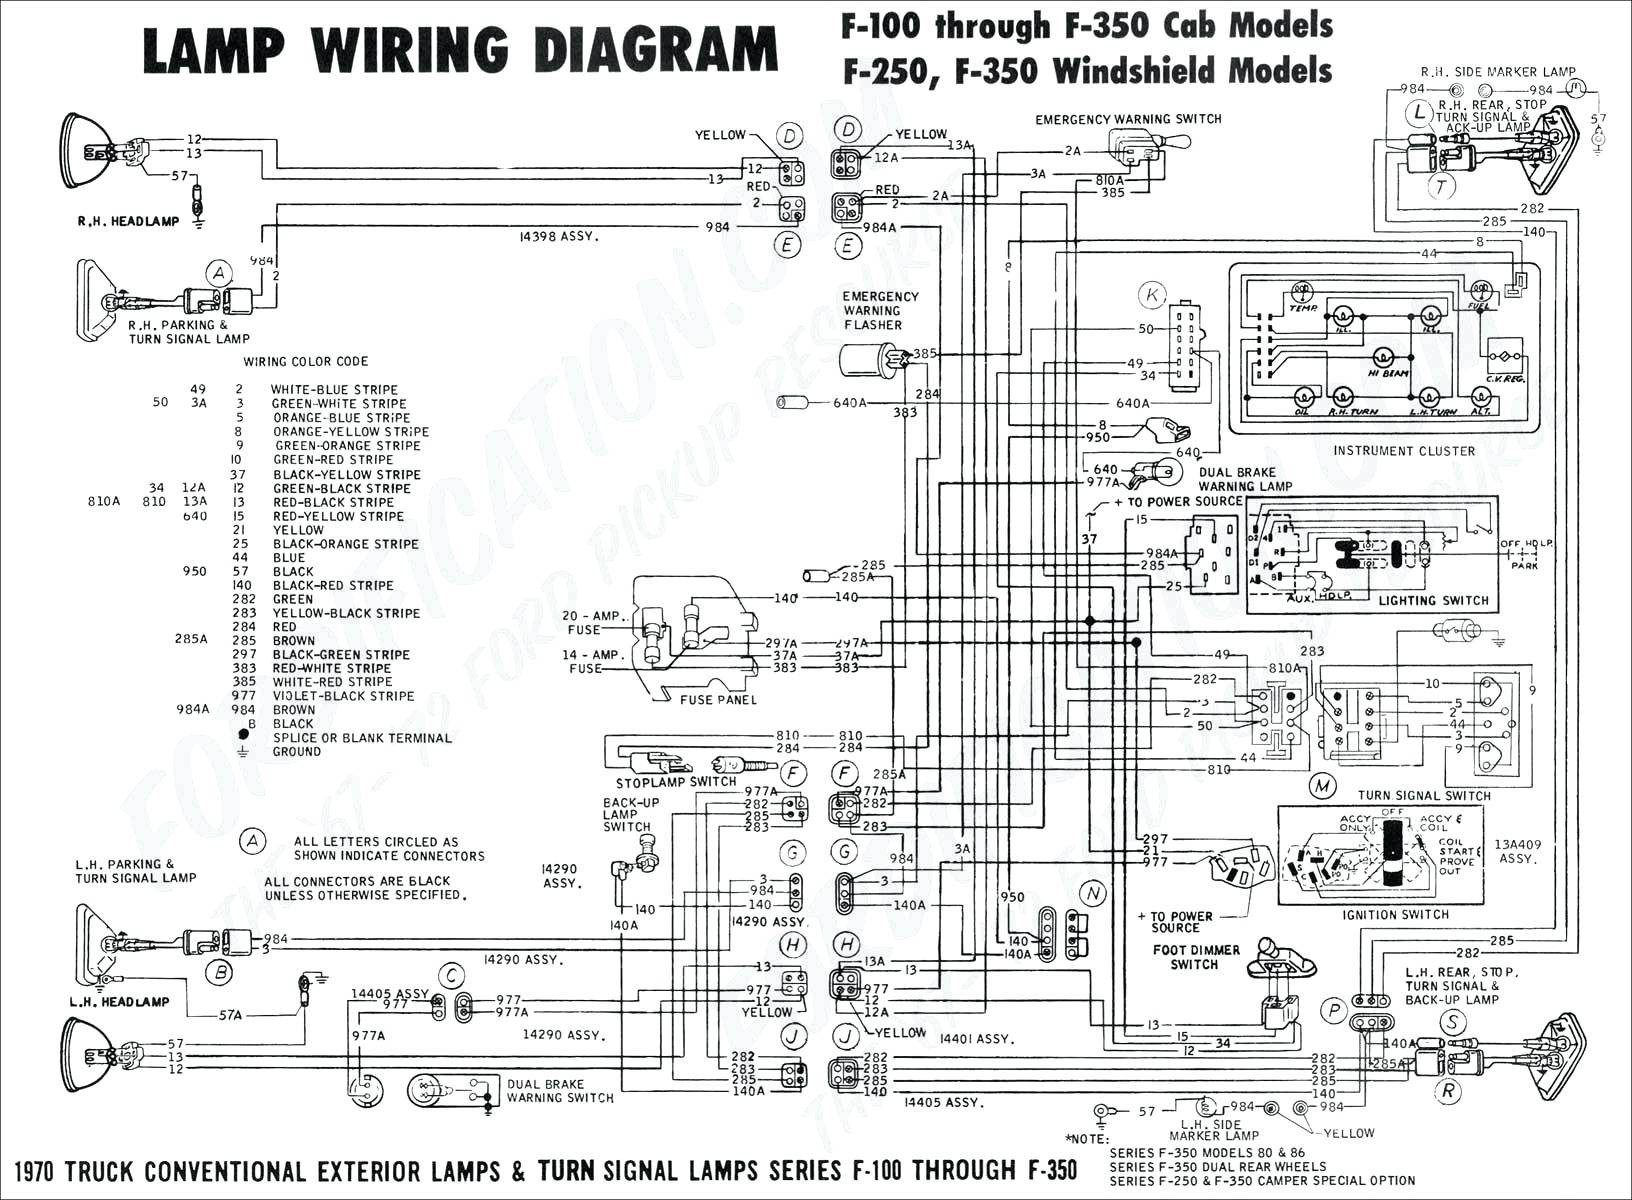 2000 ford f350 tail light wiring diagram awesome 2005 ford f 350 wiring diagram enthusiast wiring diagrams e280a2 of 2000 ford f350 tail light wiring diagram